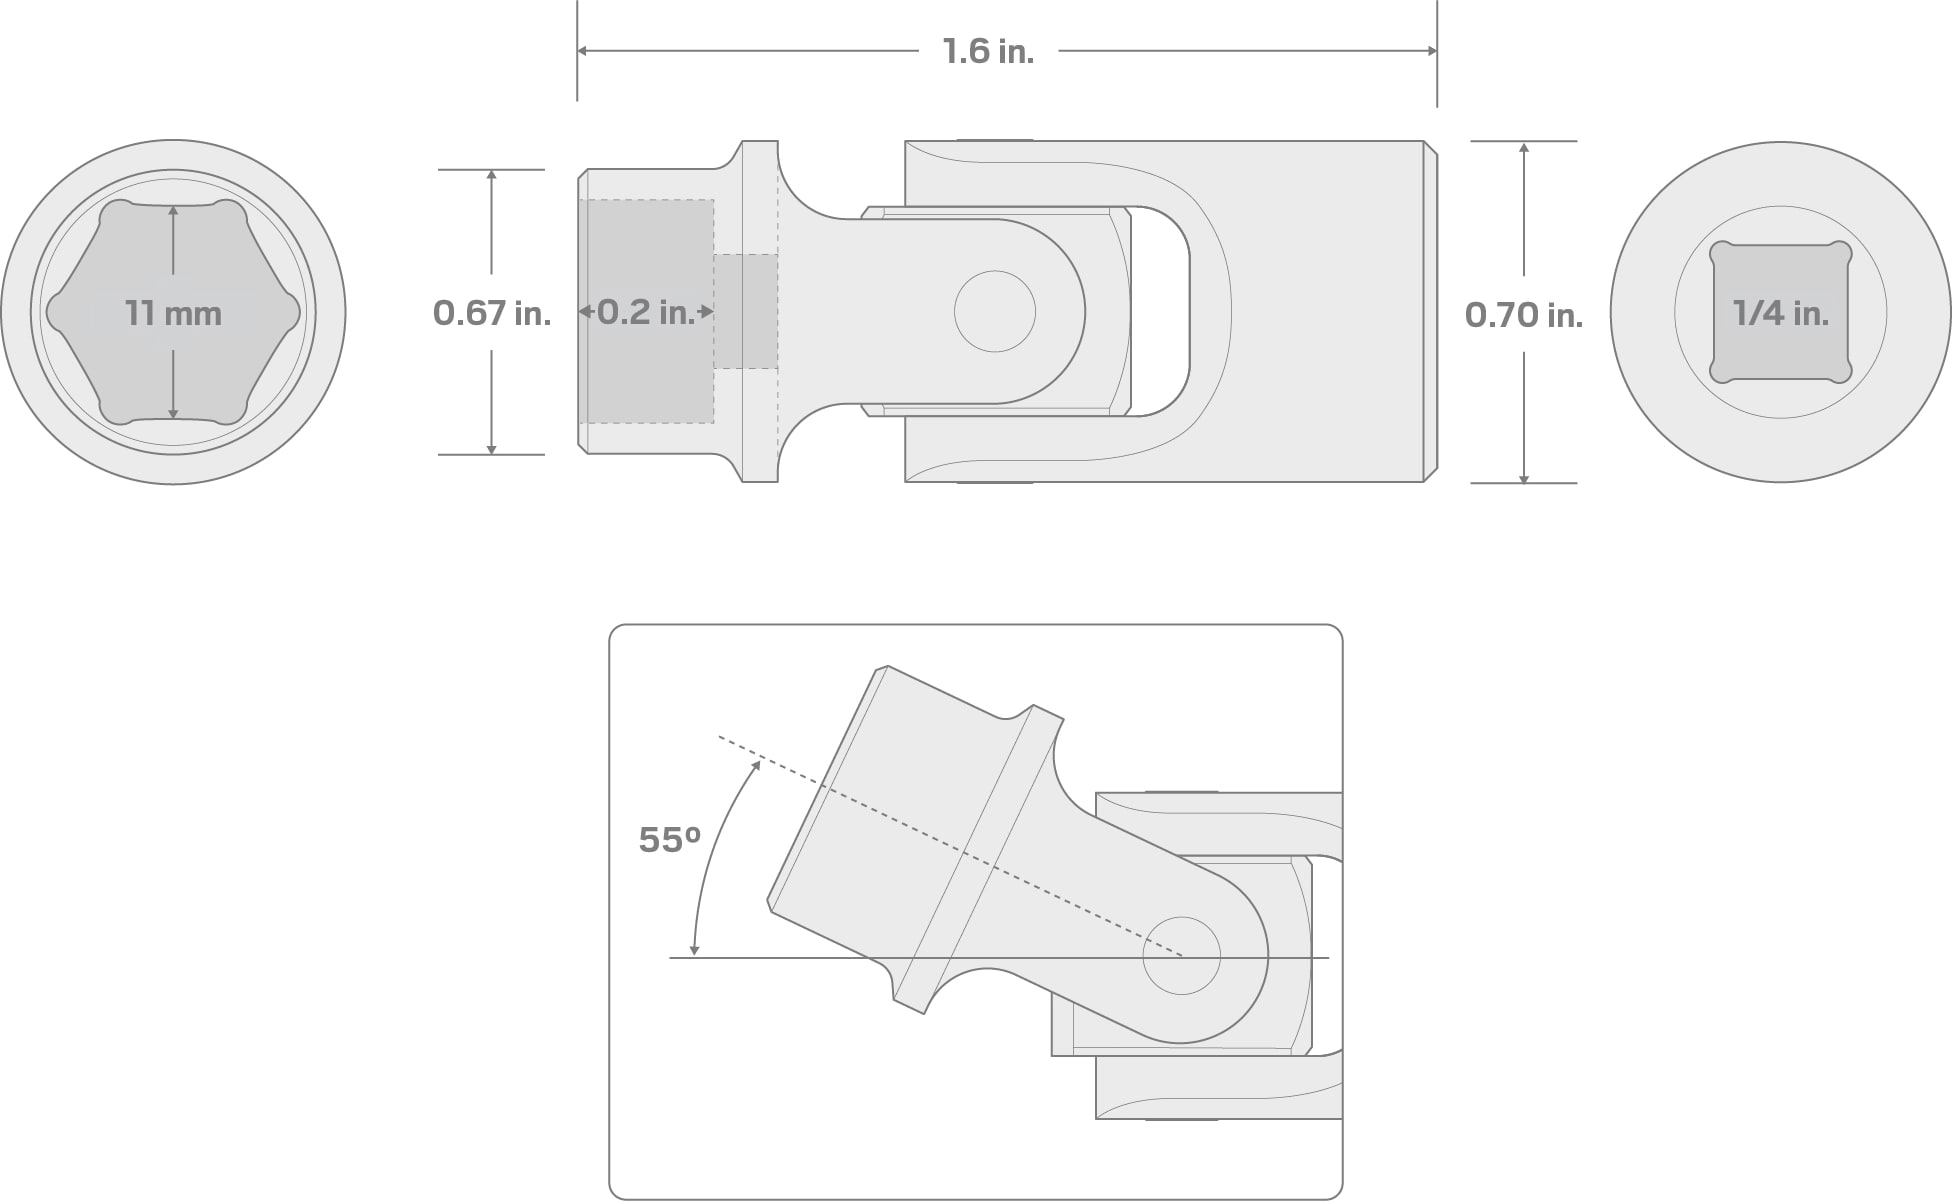 Specs for 3/8 Inch Drive x 7/16 Inch Universal Joint Socket